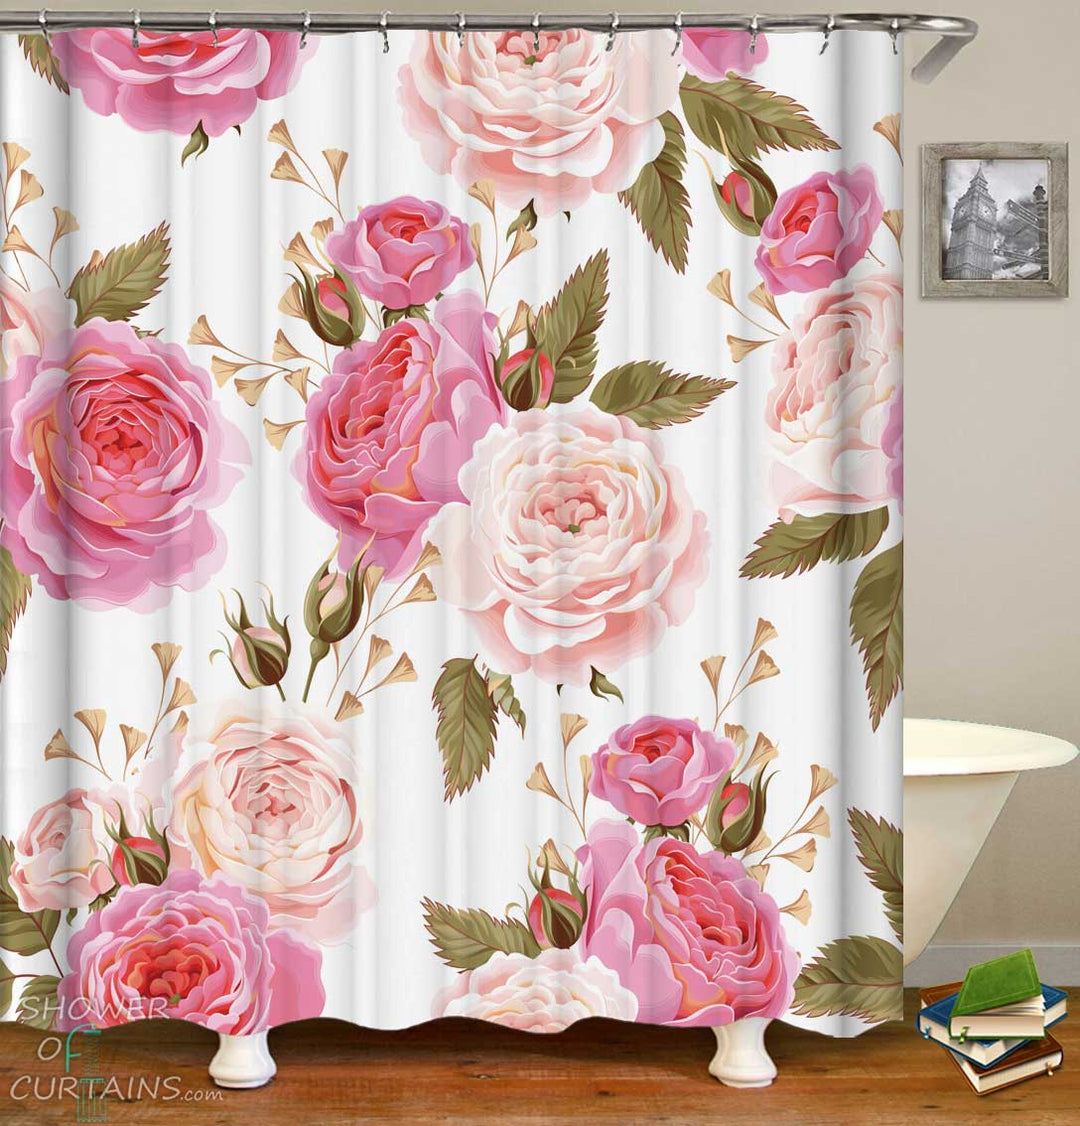 Shower Curtains with Classical Pink Floral